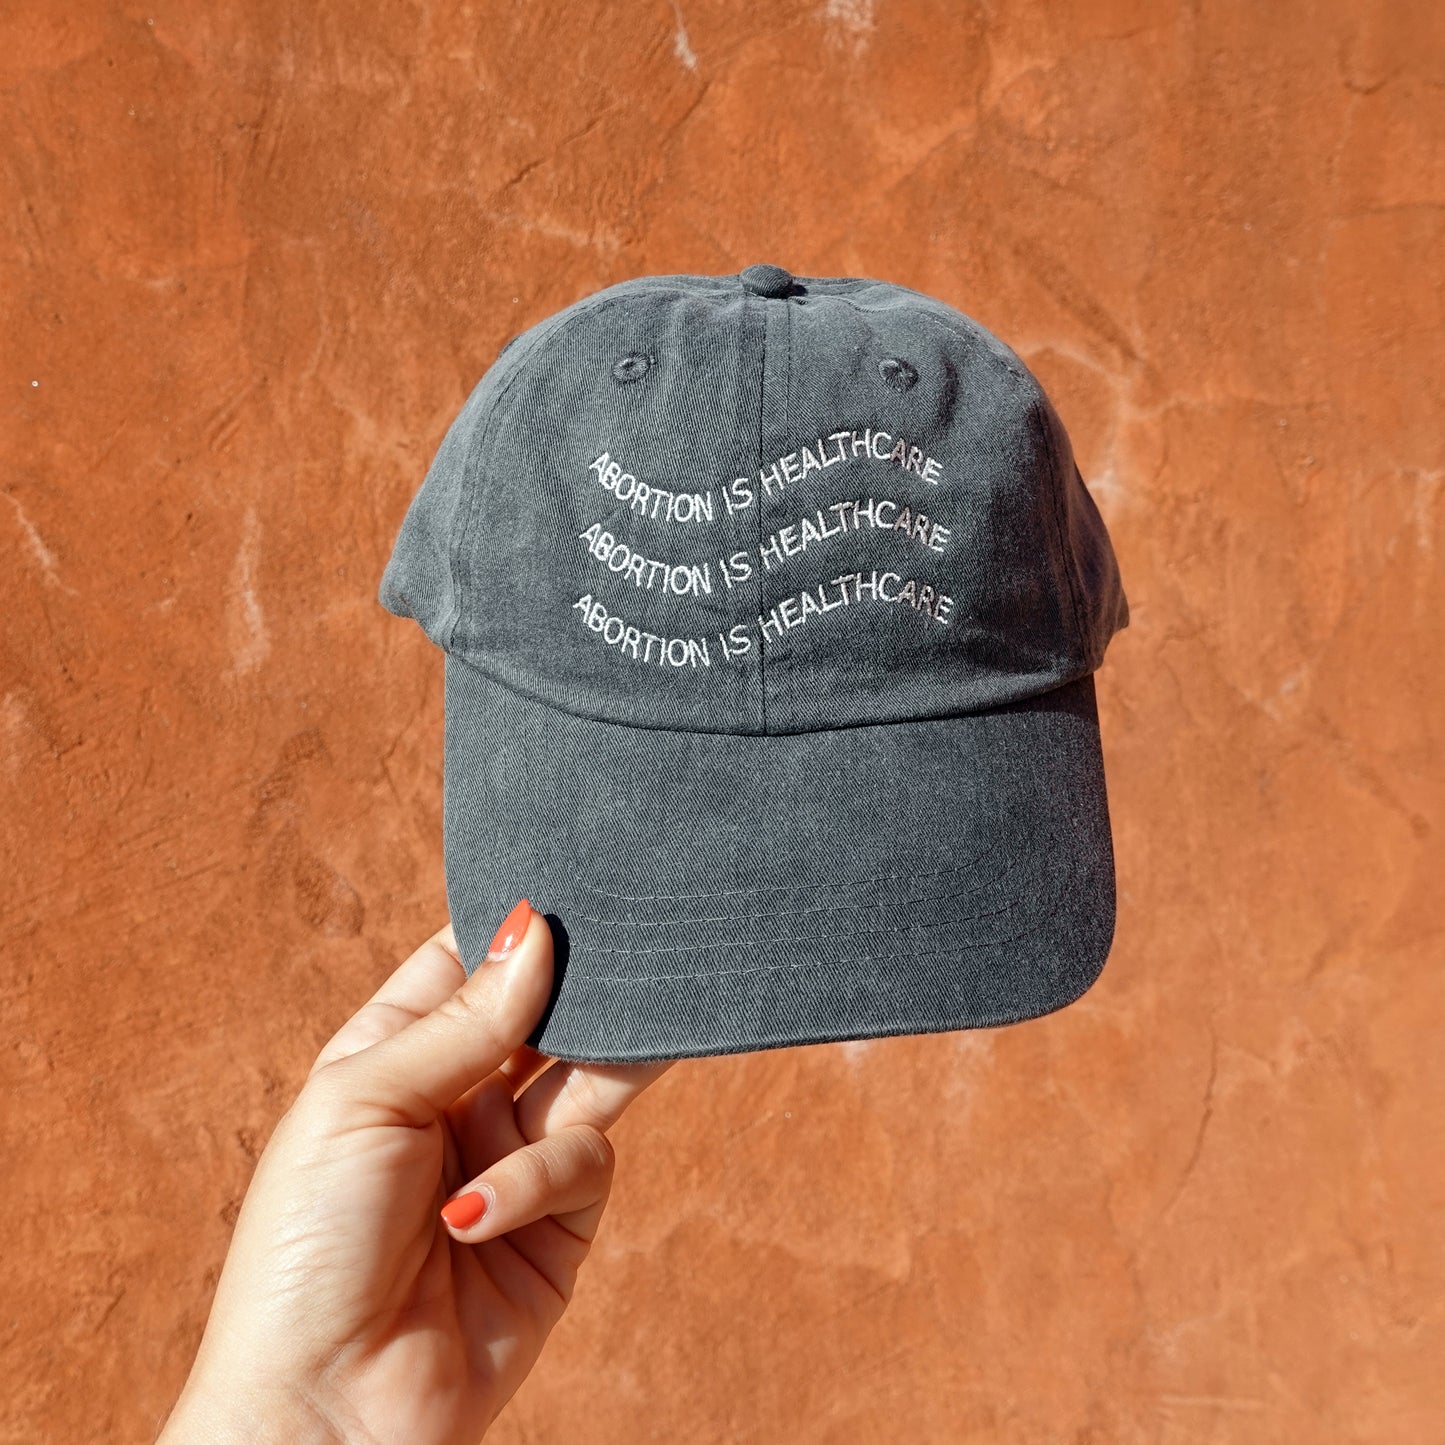 Abortion Is Healthcare Hat (Phenomenal x Read Receipts) - Charcoal